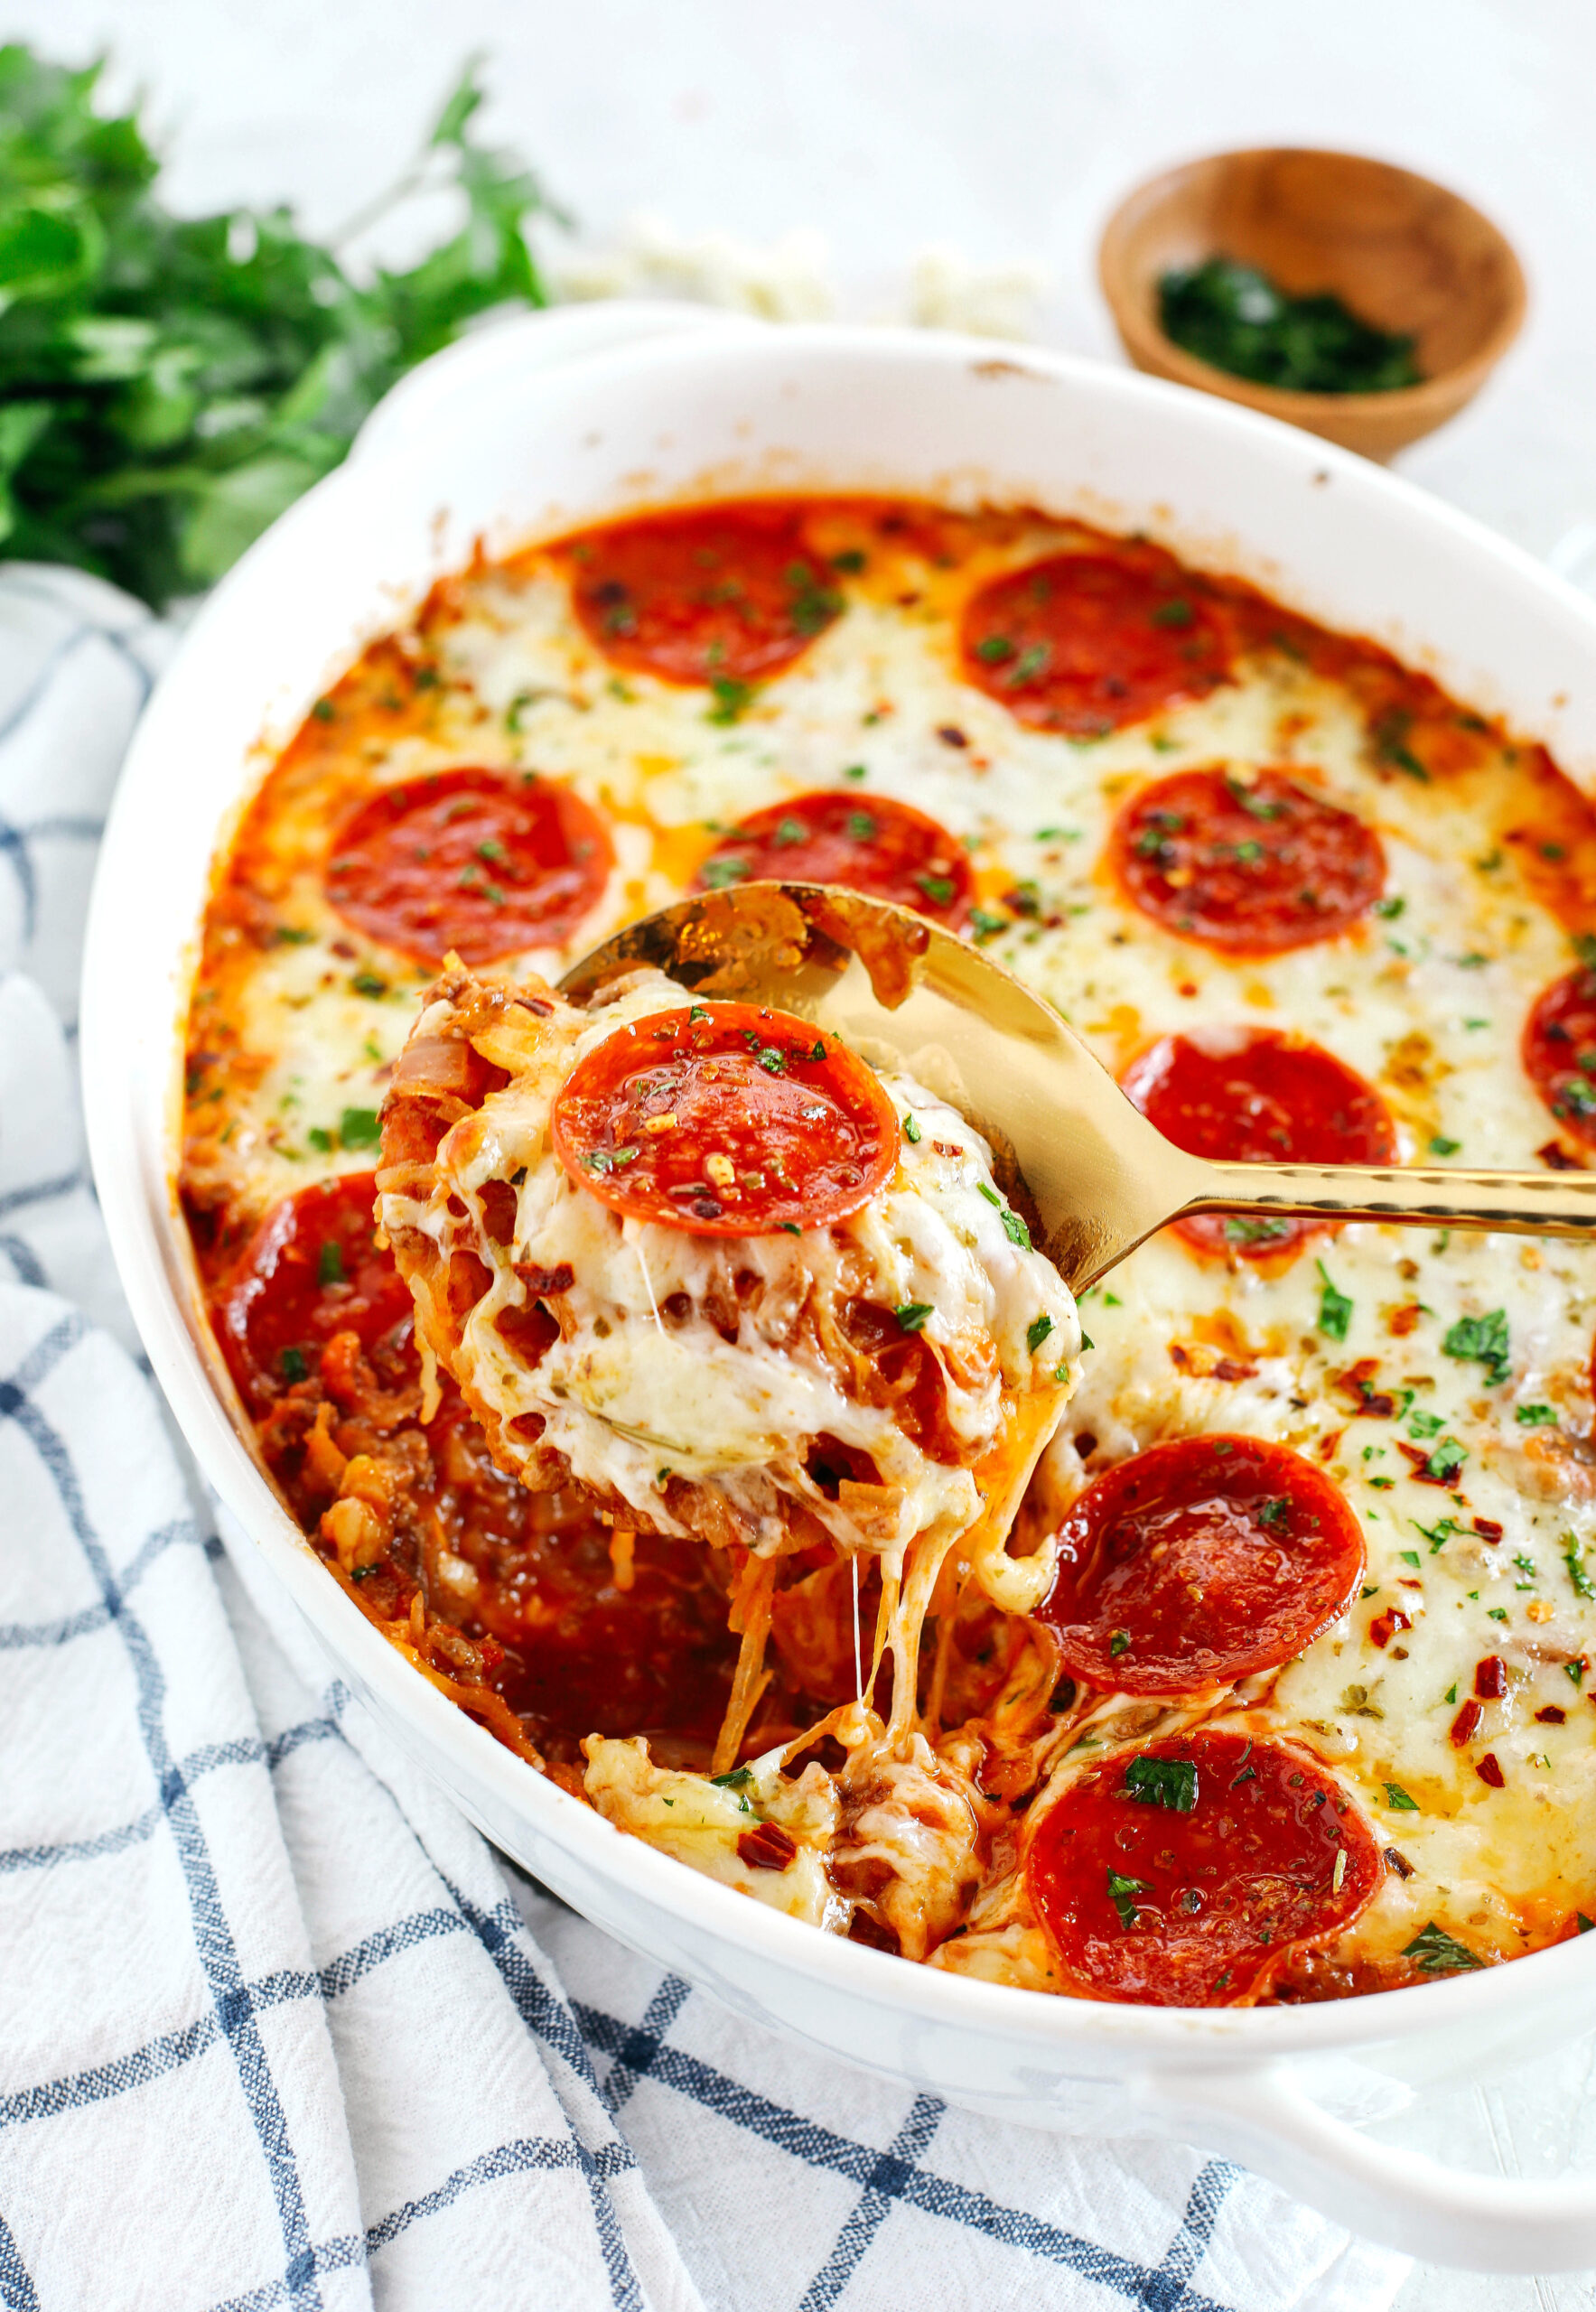 This Spaghetti Squash Pizza Casserole is the perfect low carb comfort food that is delicious, super filling and made with seasoned ground beef, melty cheese and your favorite marinara!